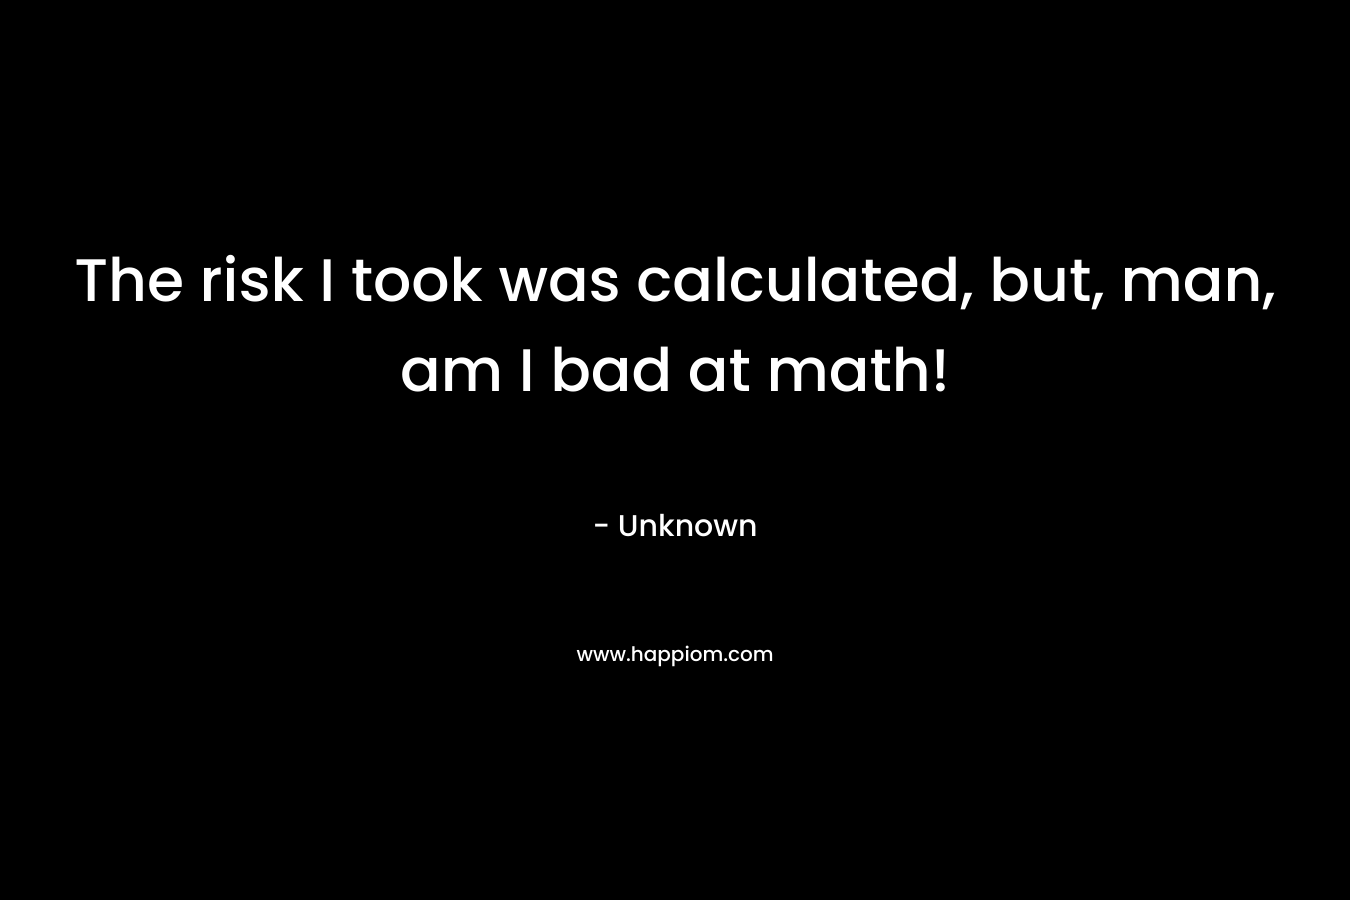 The risk I took was calculated, but, man, am I bad at math! – Unknown